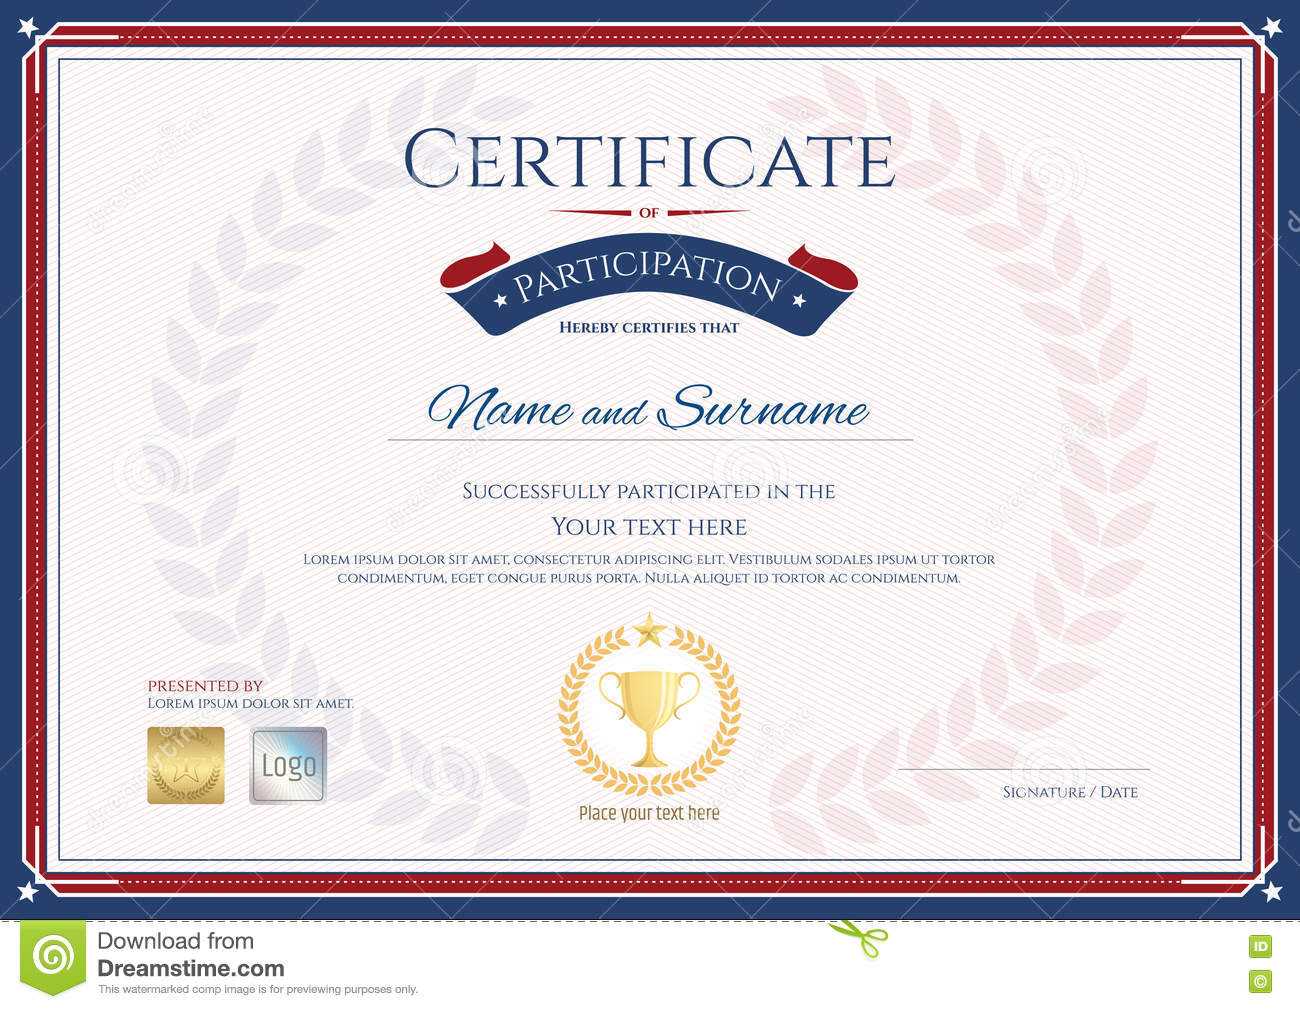 Certificate Of Participation Free Template – Calep Pertaining To Free Templates For Certificates Of Participation